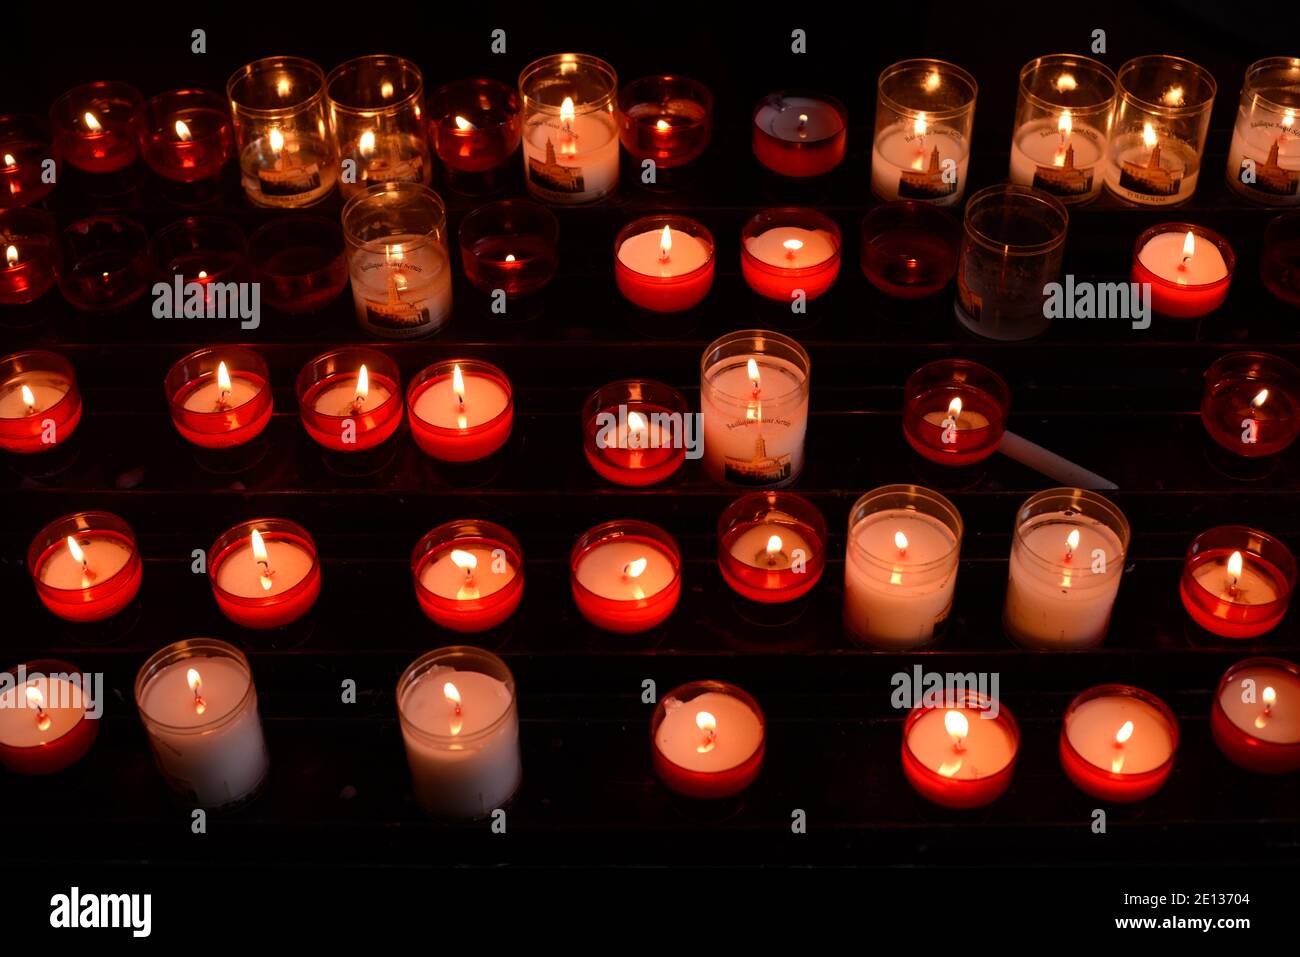 Display of Votive Candles or Prayer Candles Lit as Christian or Religious Offerings on Alter of Basilica of Saint Sernin Toulouse France Stock Photo